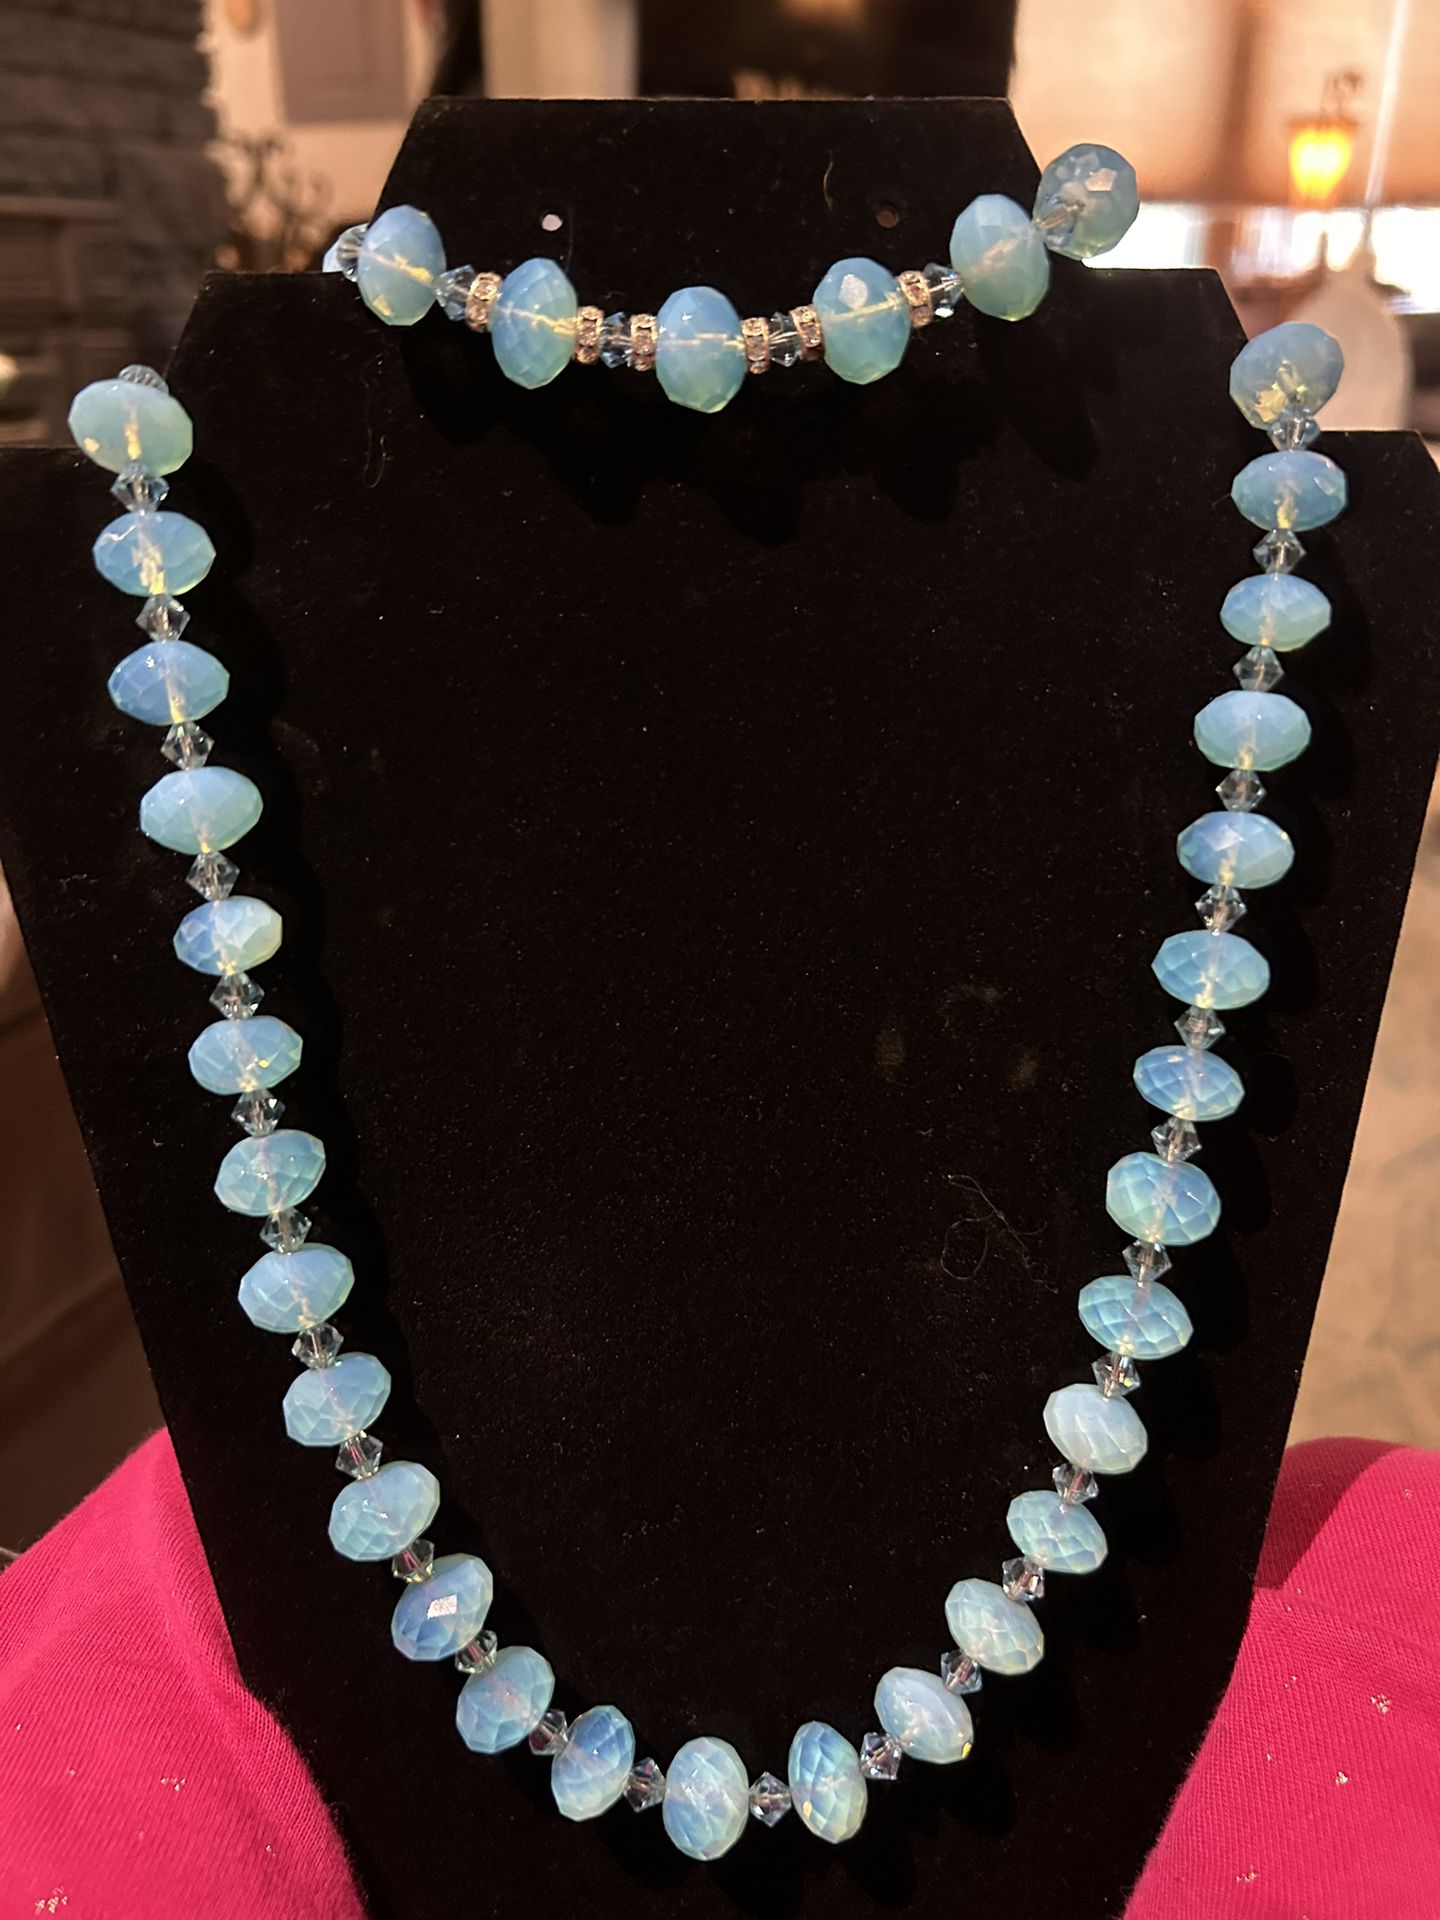 Handmade Light Blue Glass Beads With Genuine Swarovski Crystals And Silver  Necklace And Bracelet